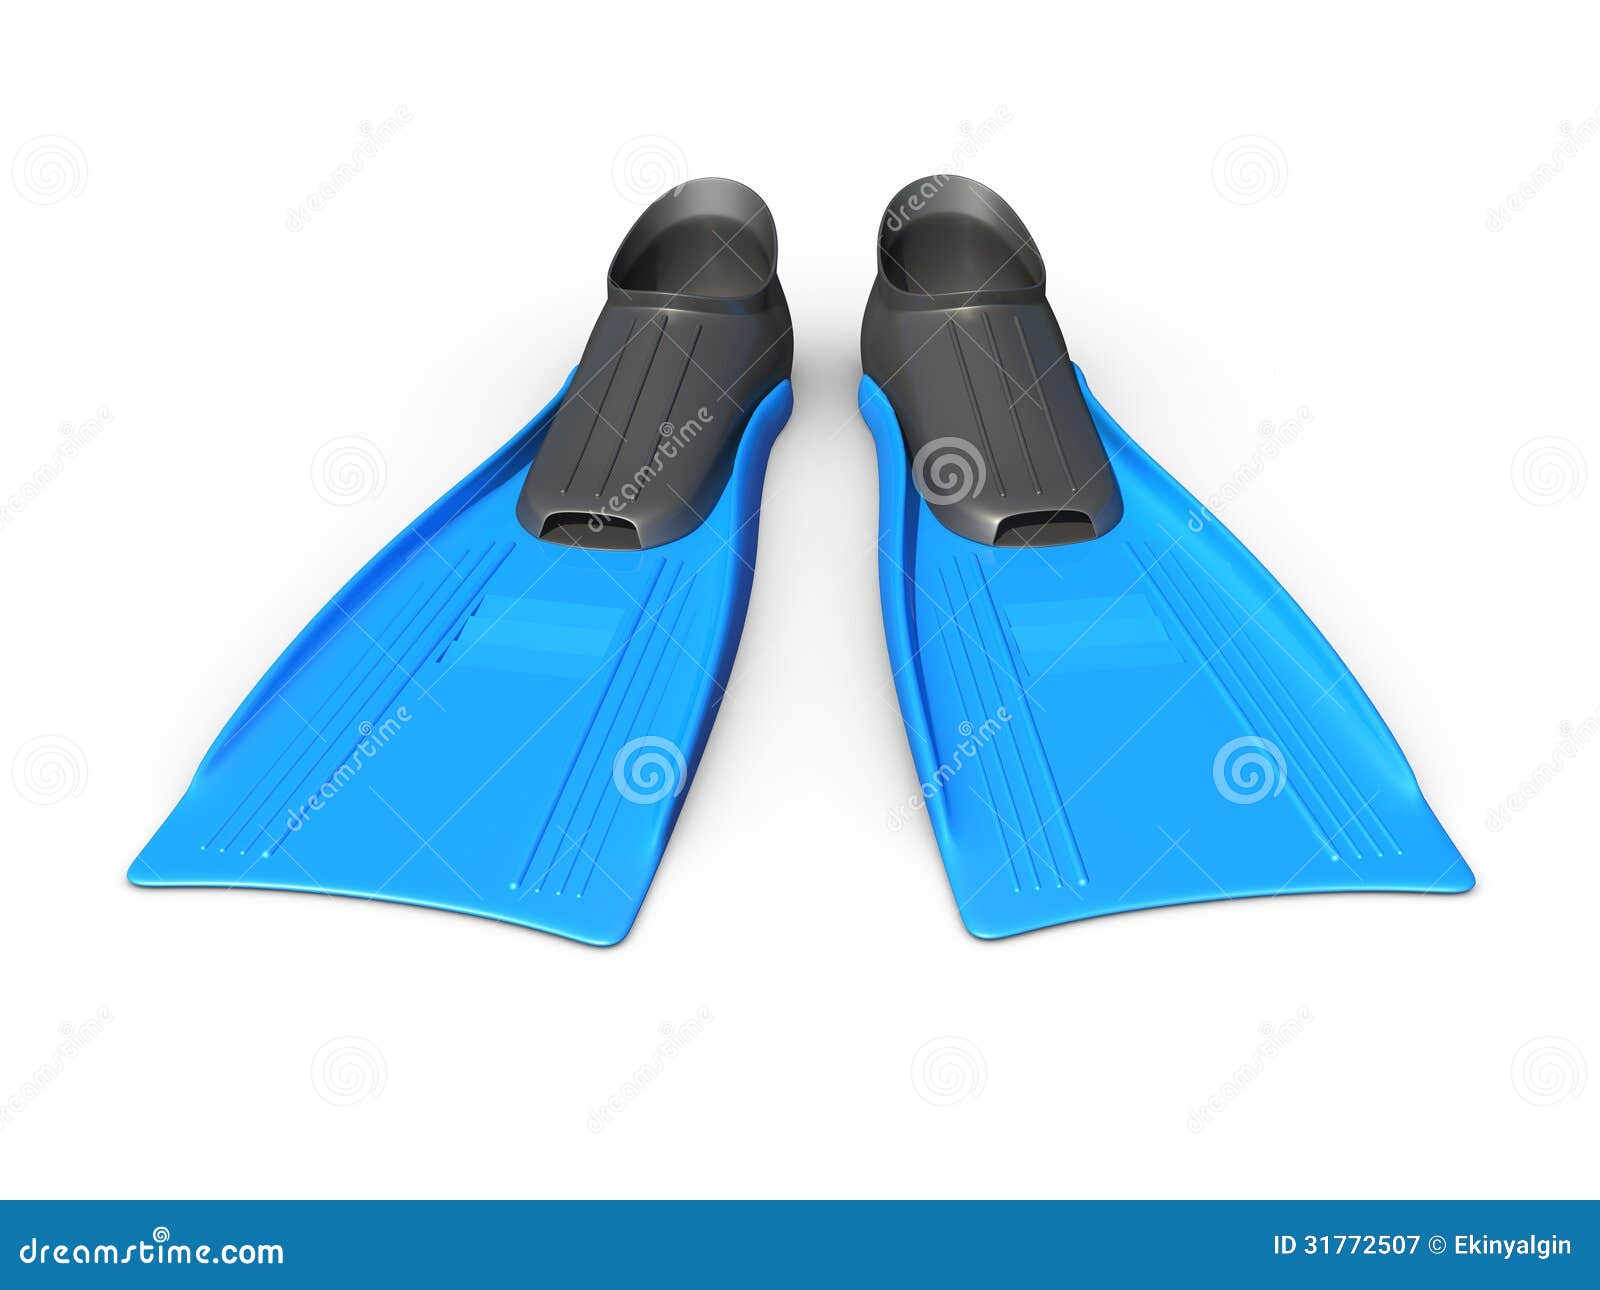 blue flippers front view isolated white background 31772507